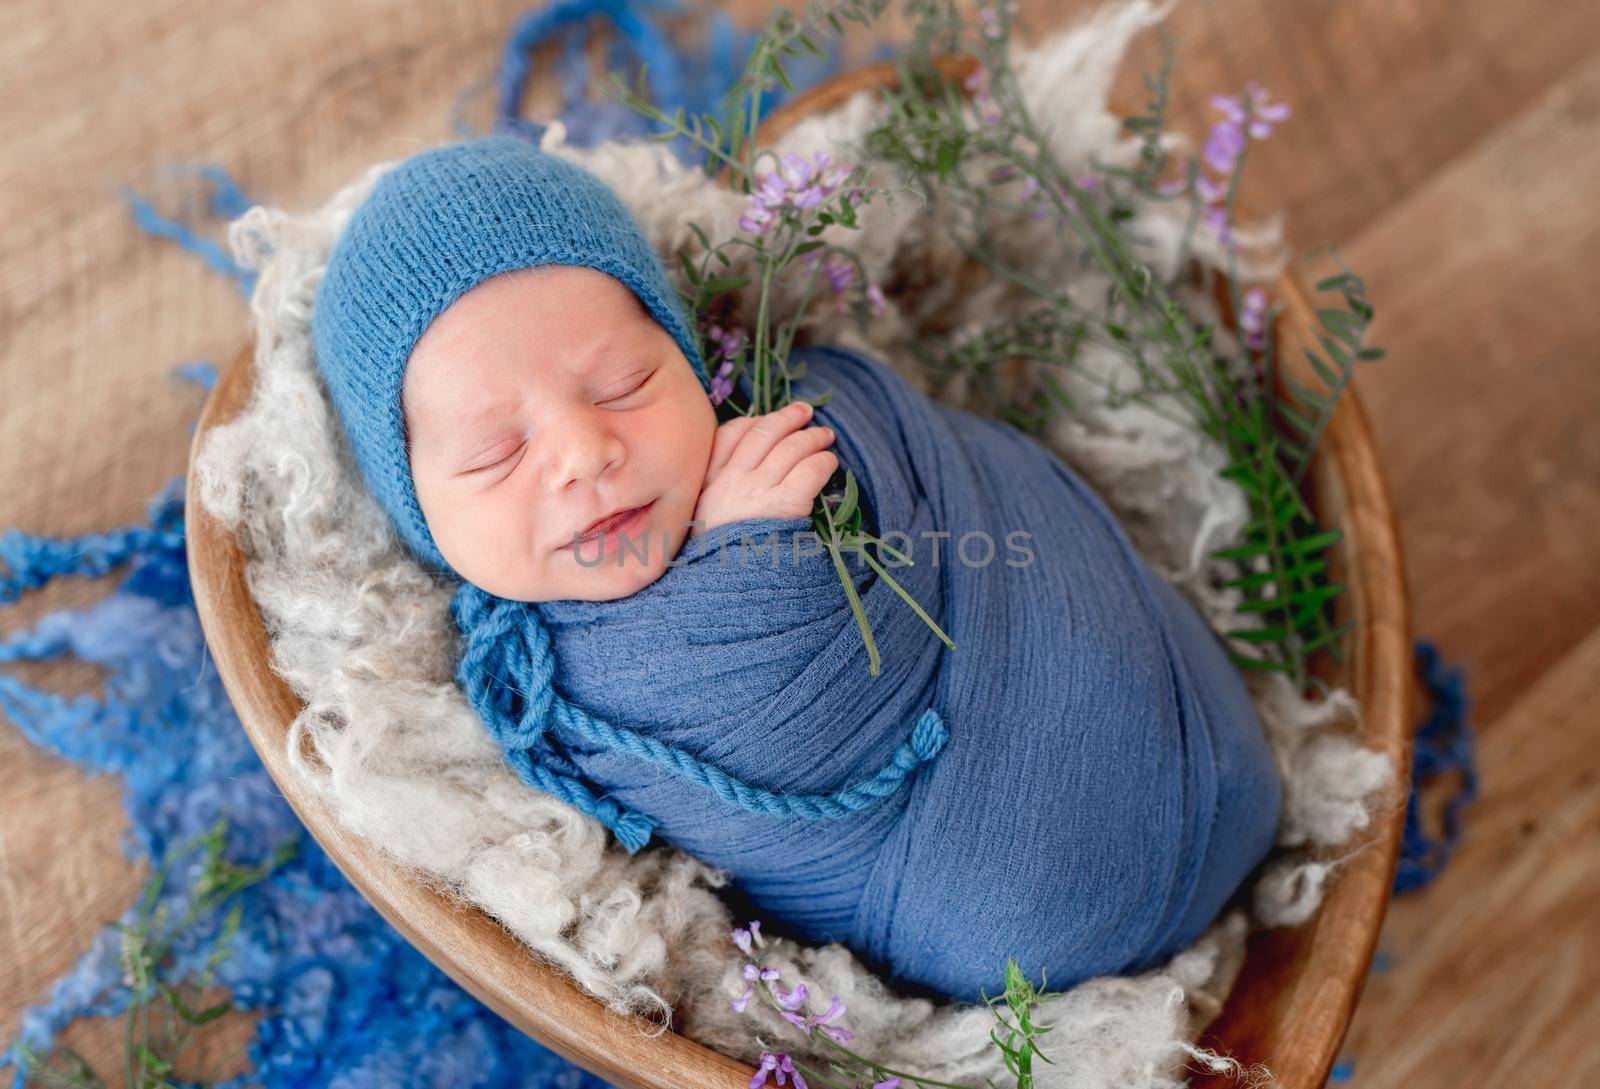 Adorable newborn baby boy swaddled in blue fabric holding purple flower in his hands smiling during sleeping. Cute infant kid wearing knitted hat in fur in wooden heart bed during studio photoshoot